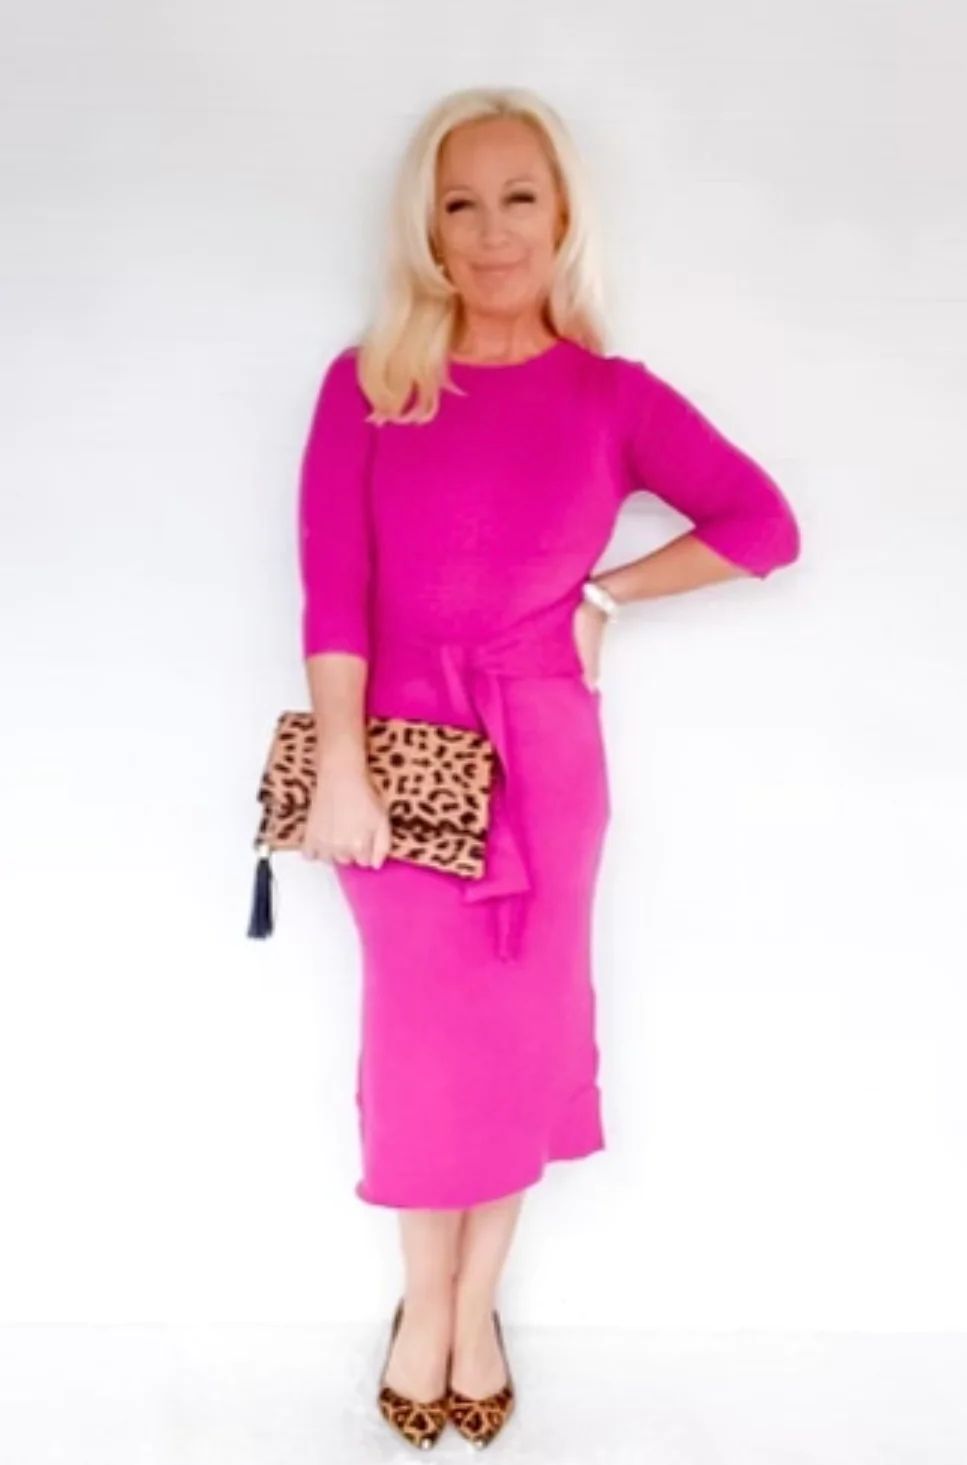 Marvelous In Magenta Dress | Peppered with leopard